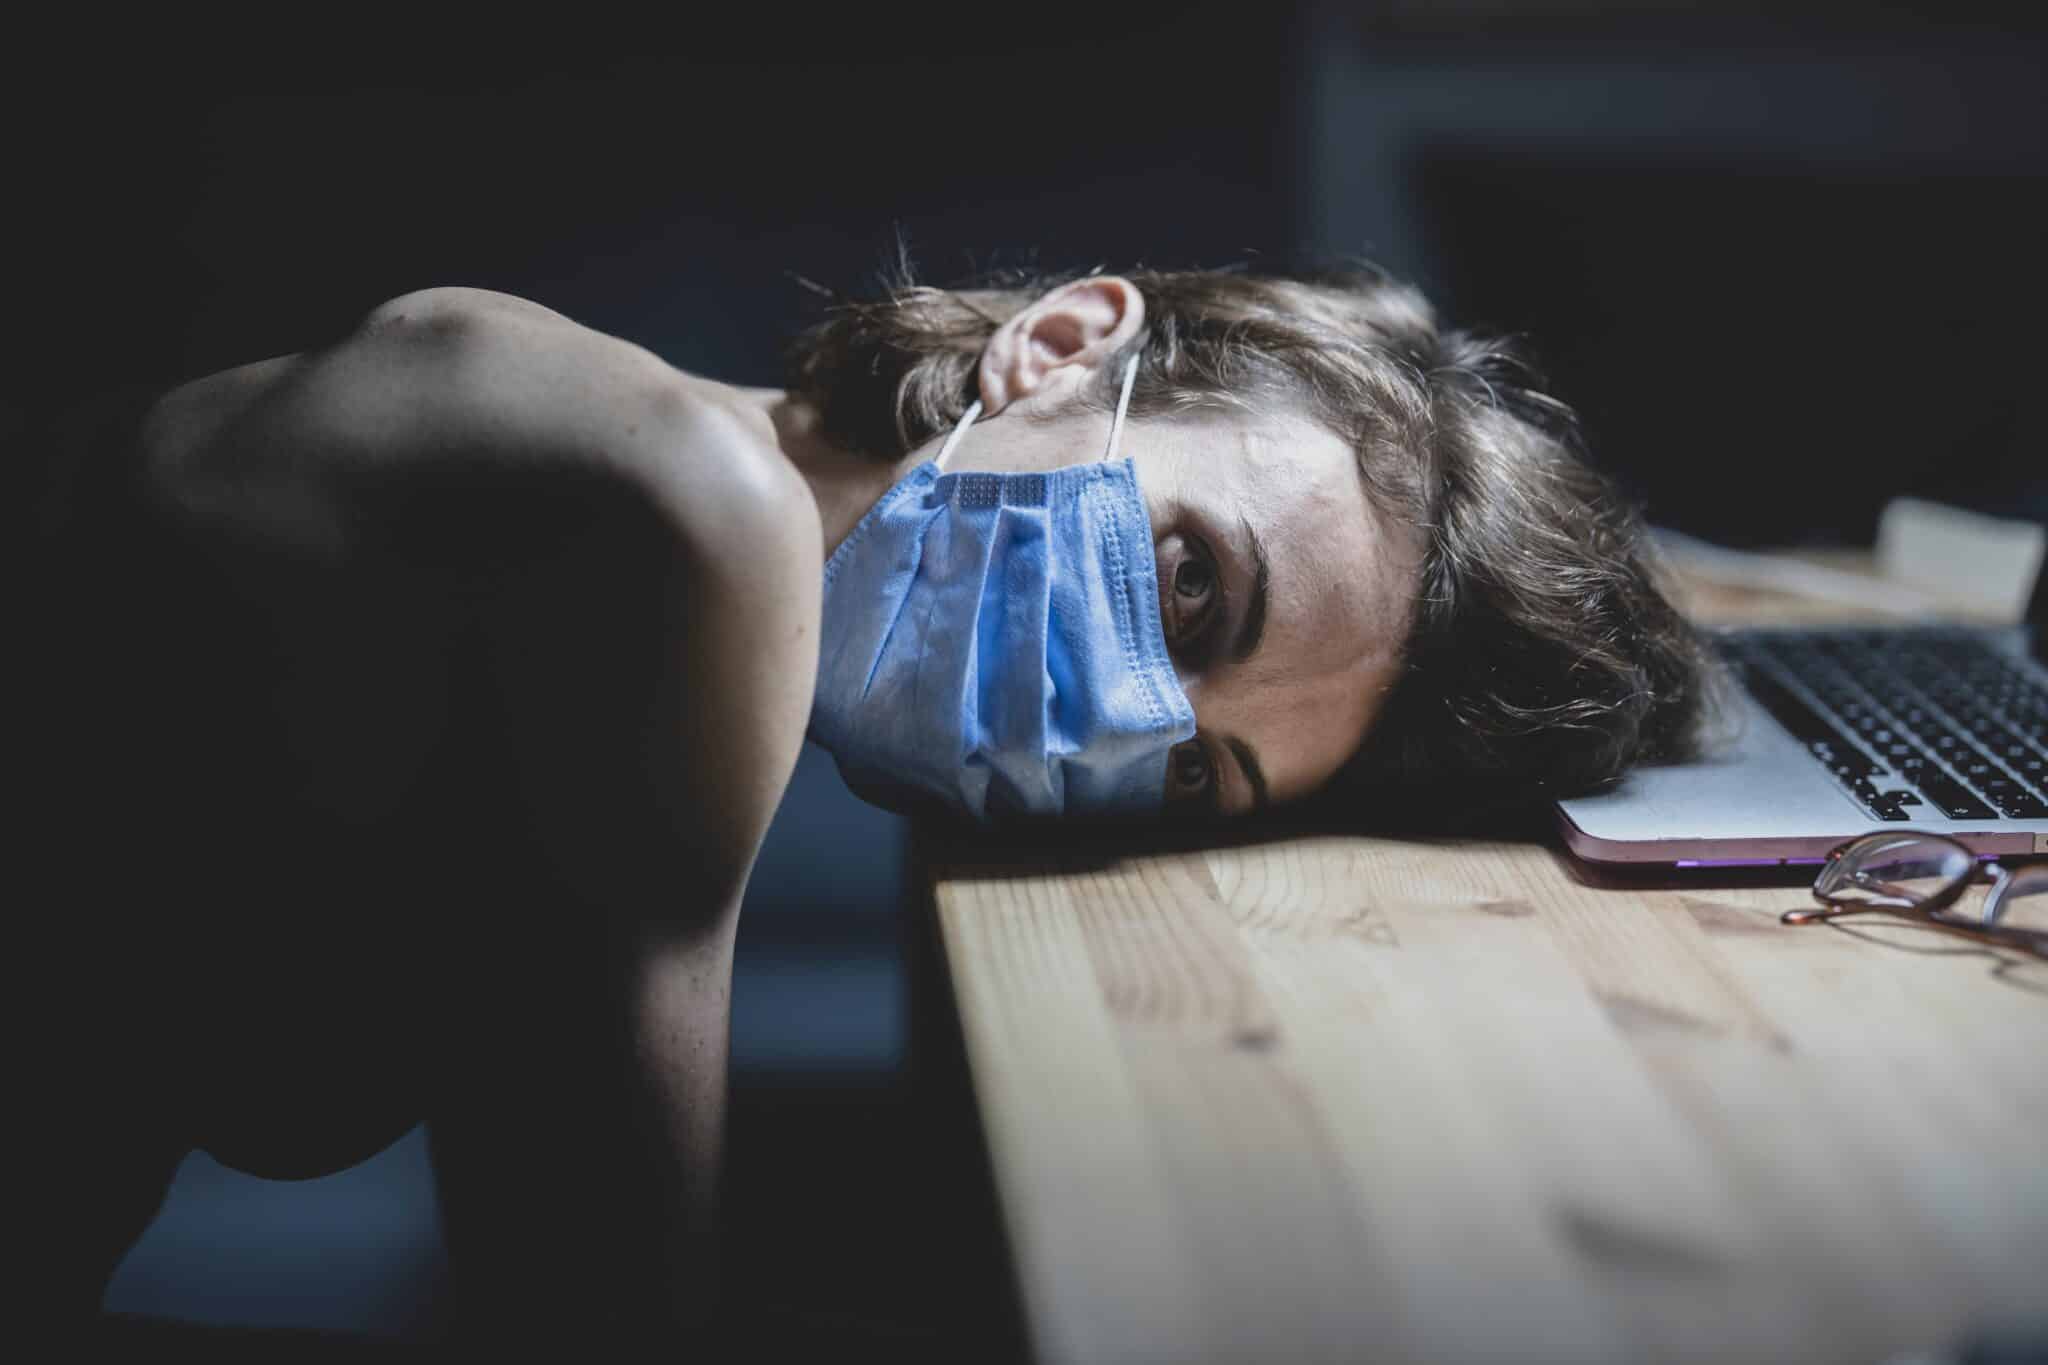 Woman in medical mask resting head on table near laptop, looking depressed.